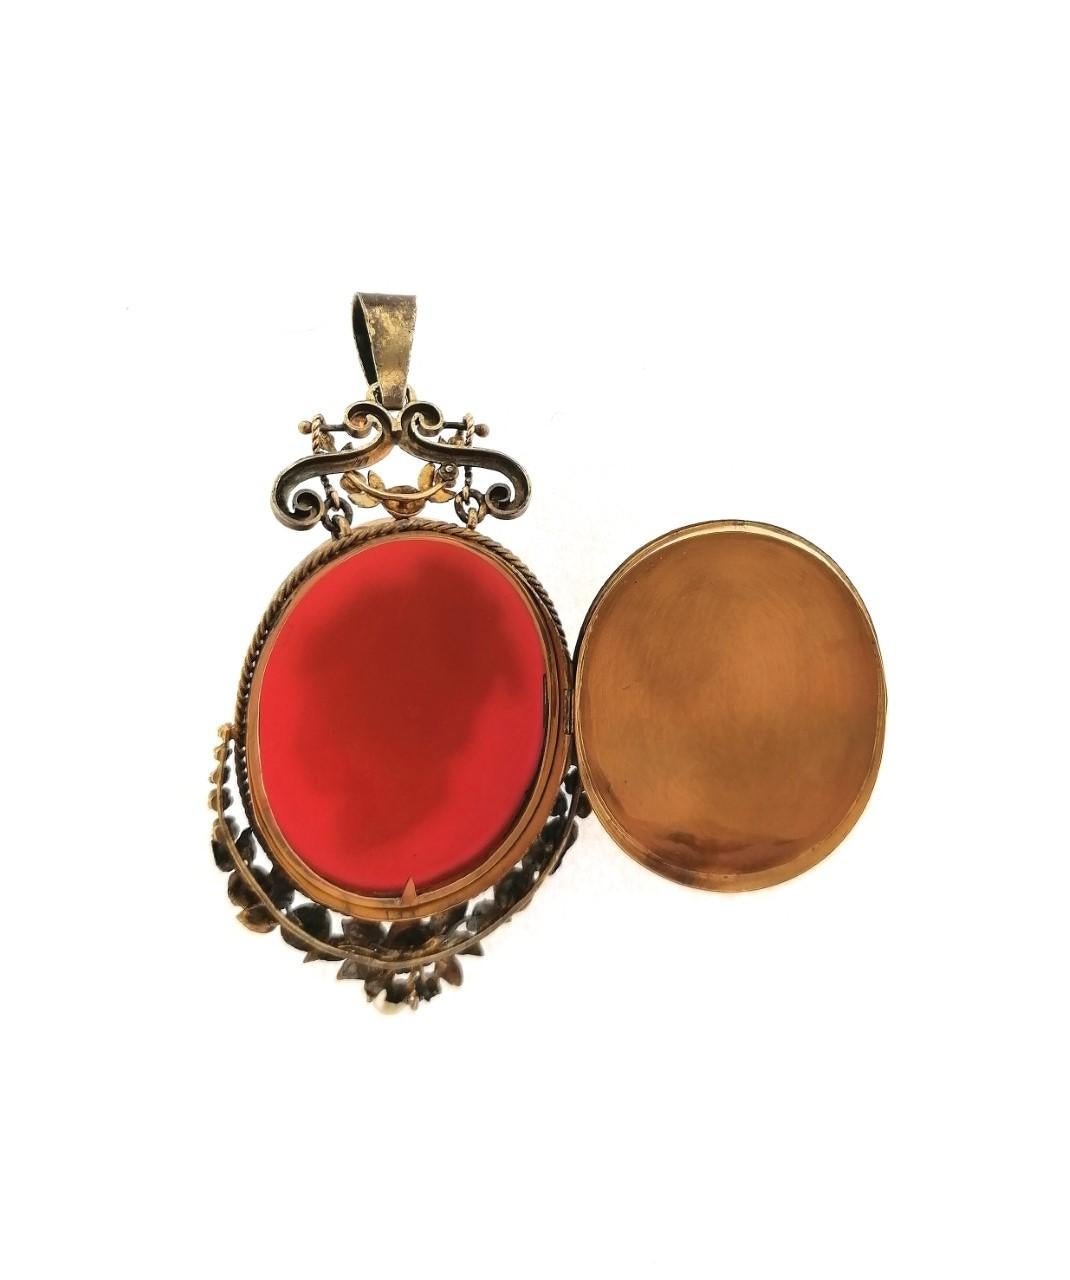 Victorian 19th Century 14 Karat Gold and White Agate Locket Pendant For Sale